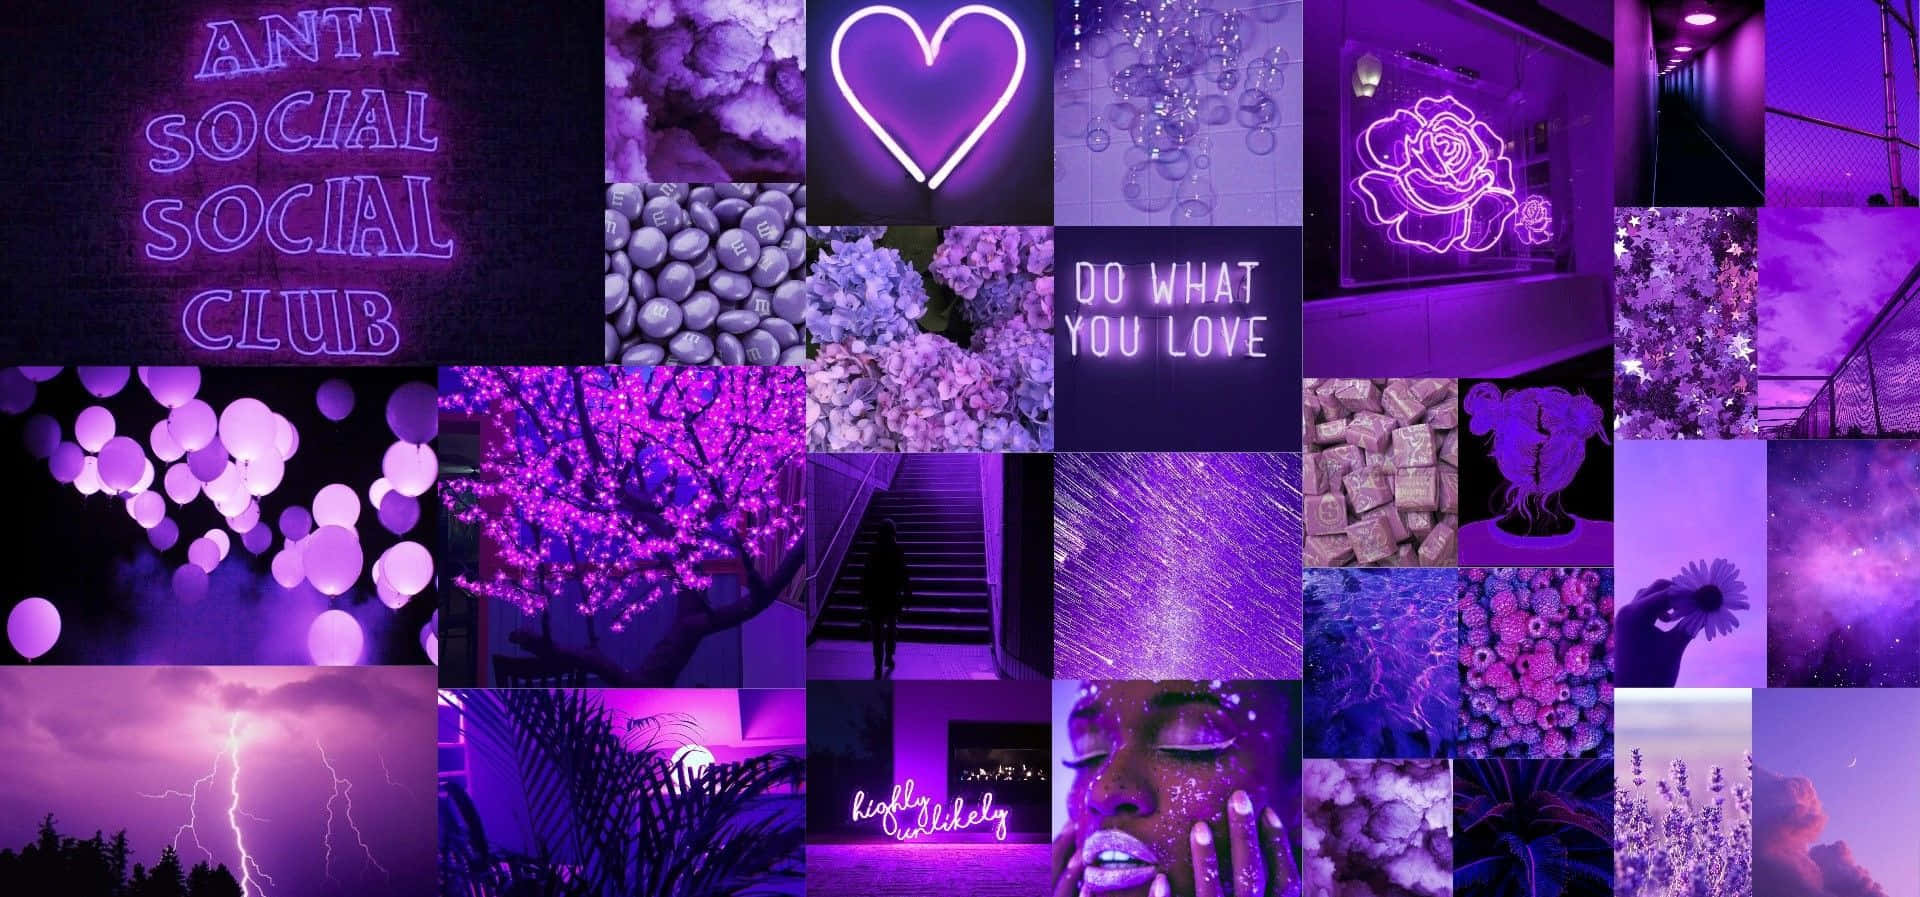 A collection of purple images with different text - Violet